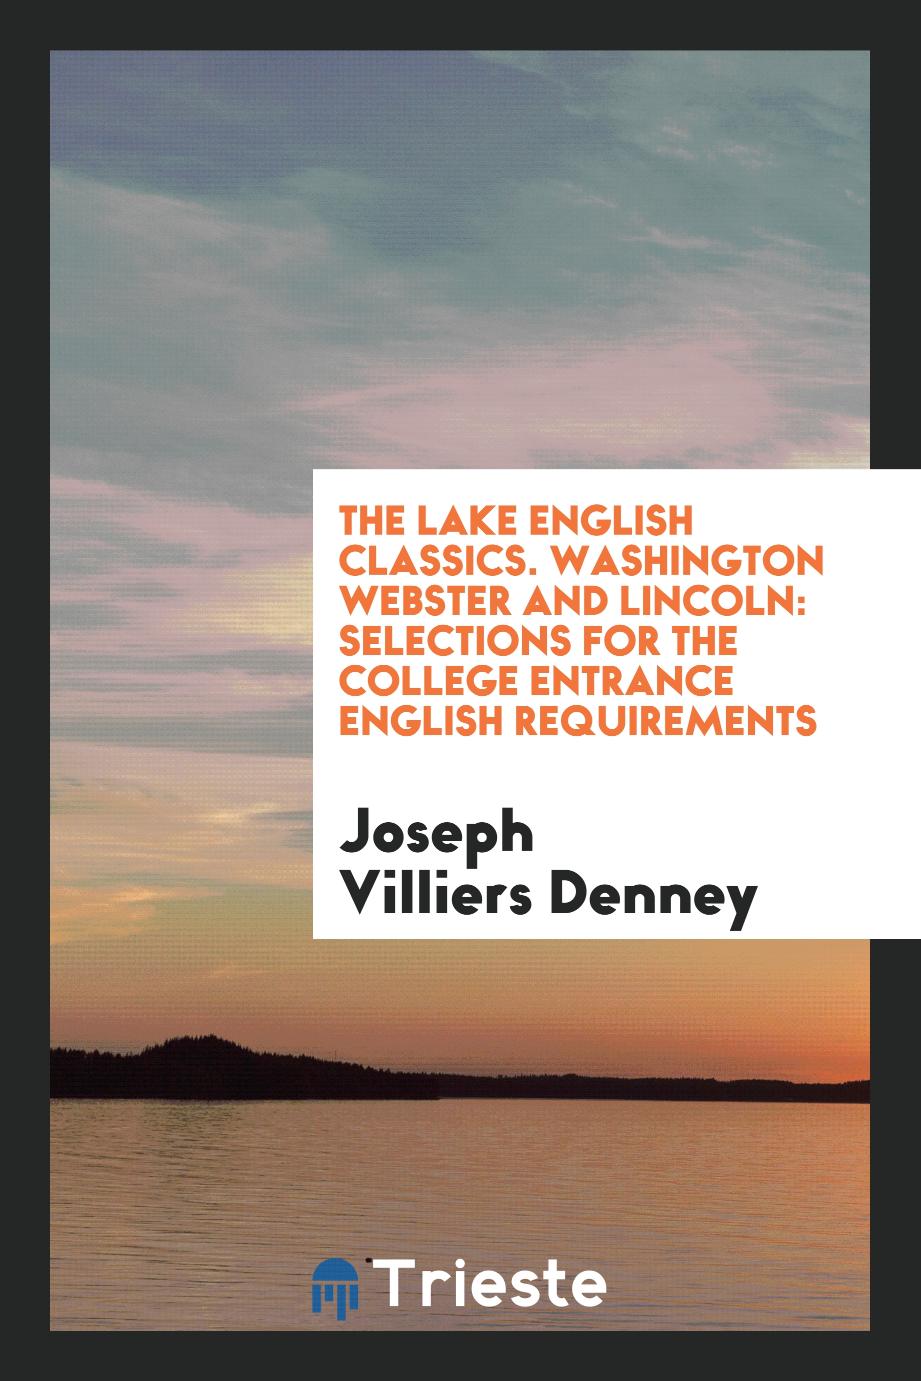 The Lake English Classics. Washington Webster and Lincoln: Selections for the College Entrance English Requirements